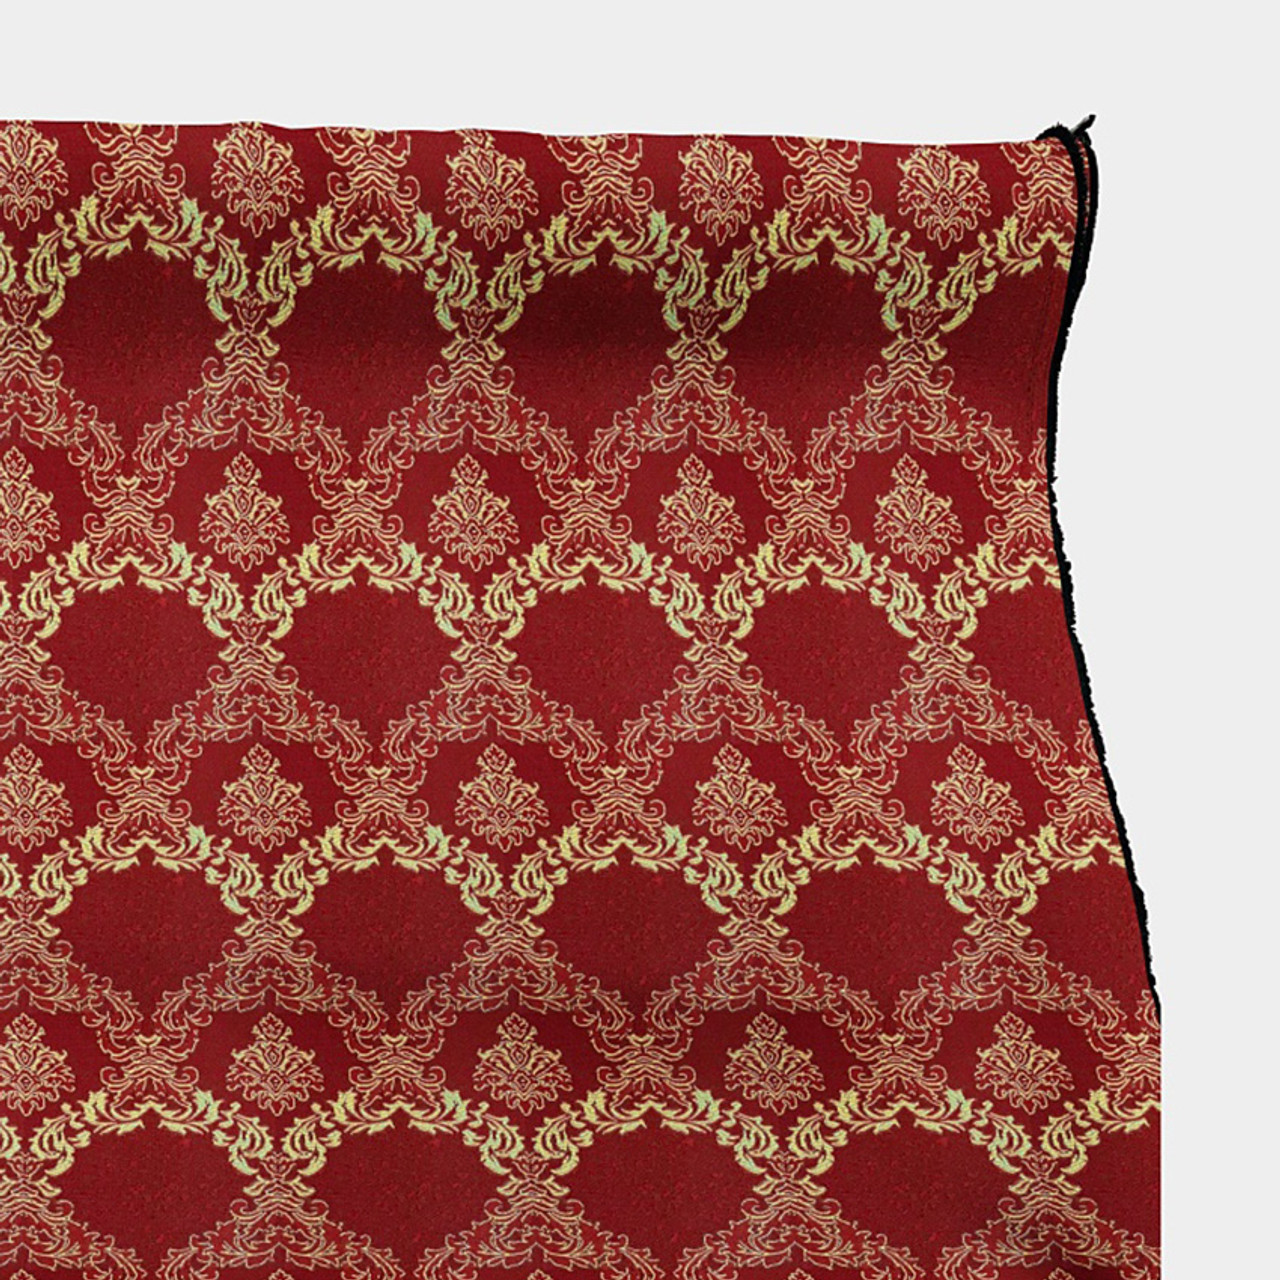 Flor del fabric - Red